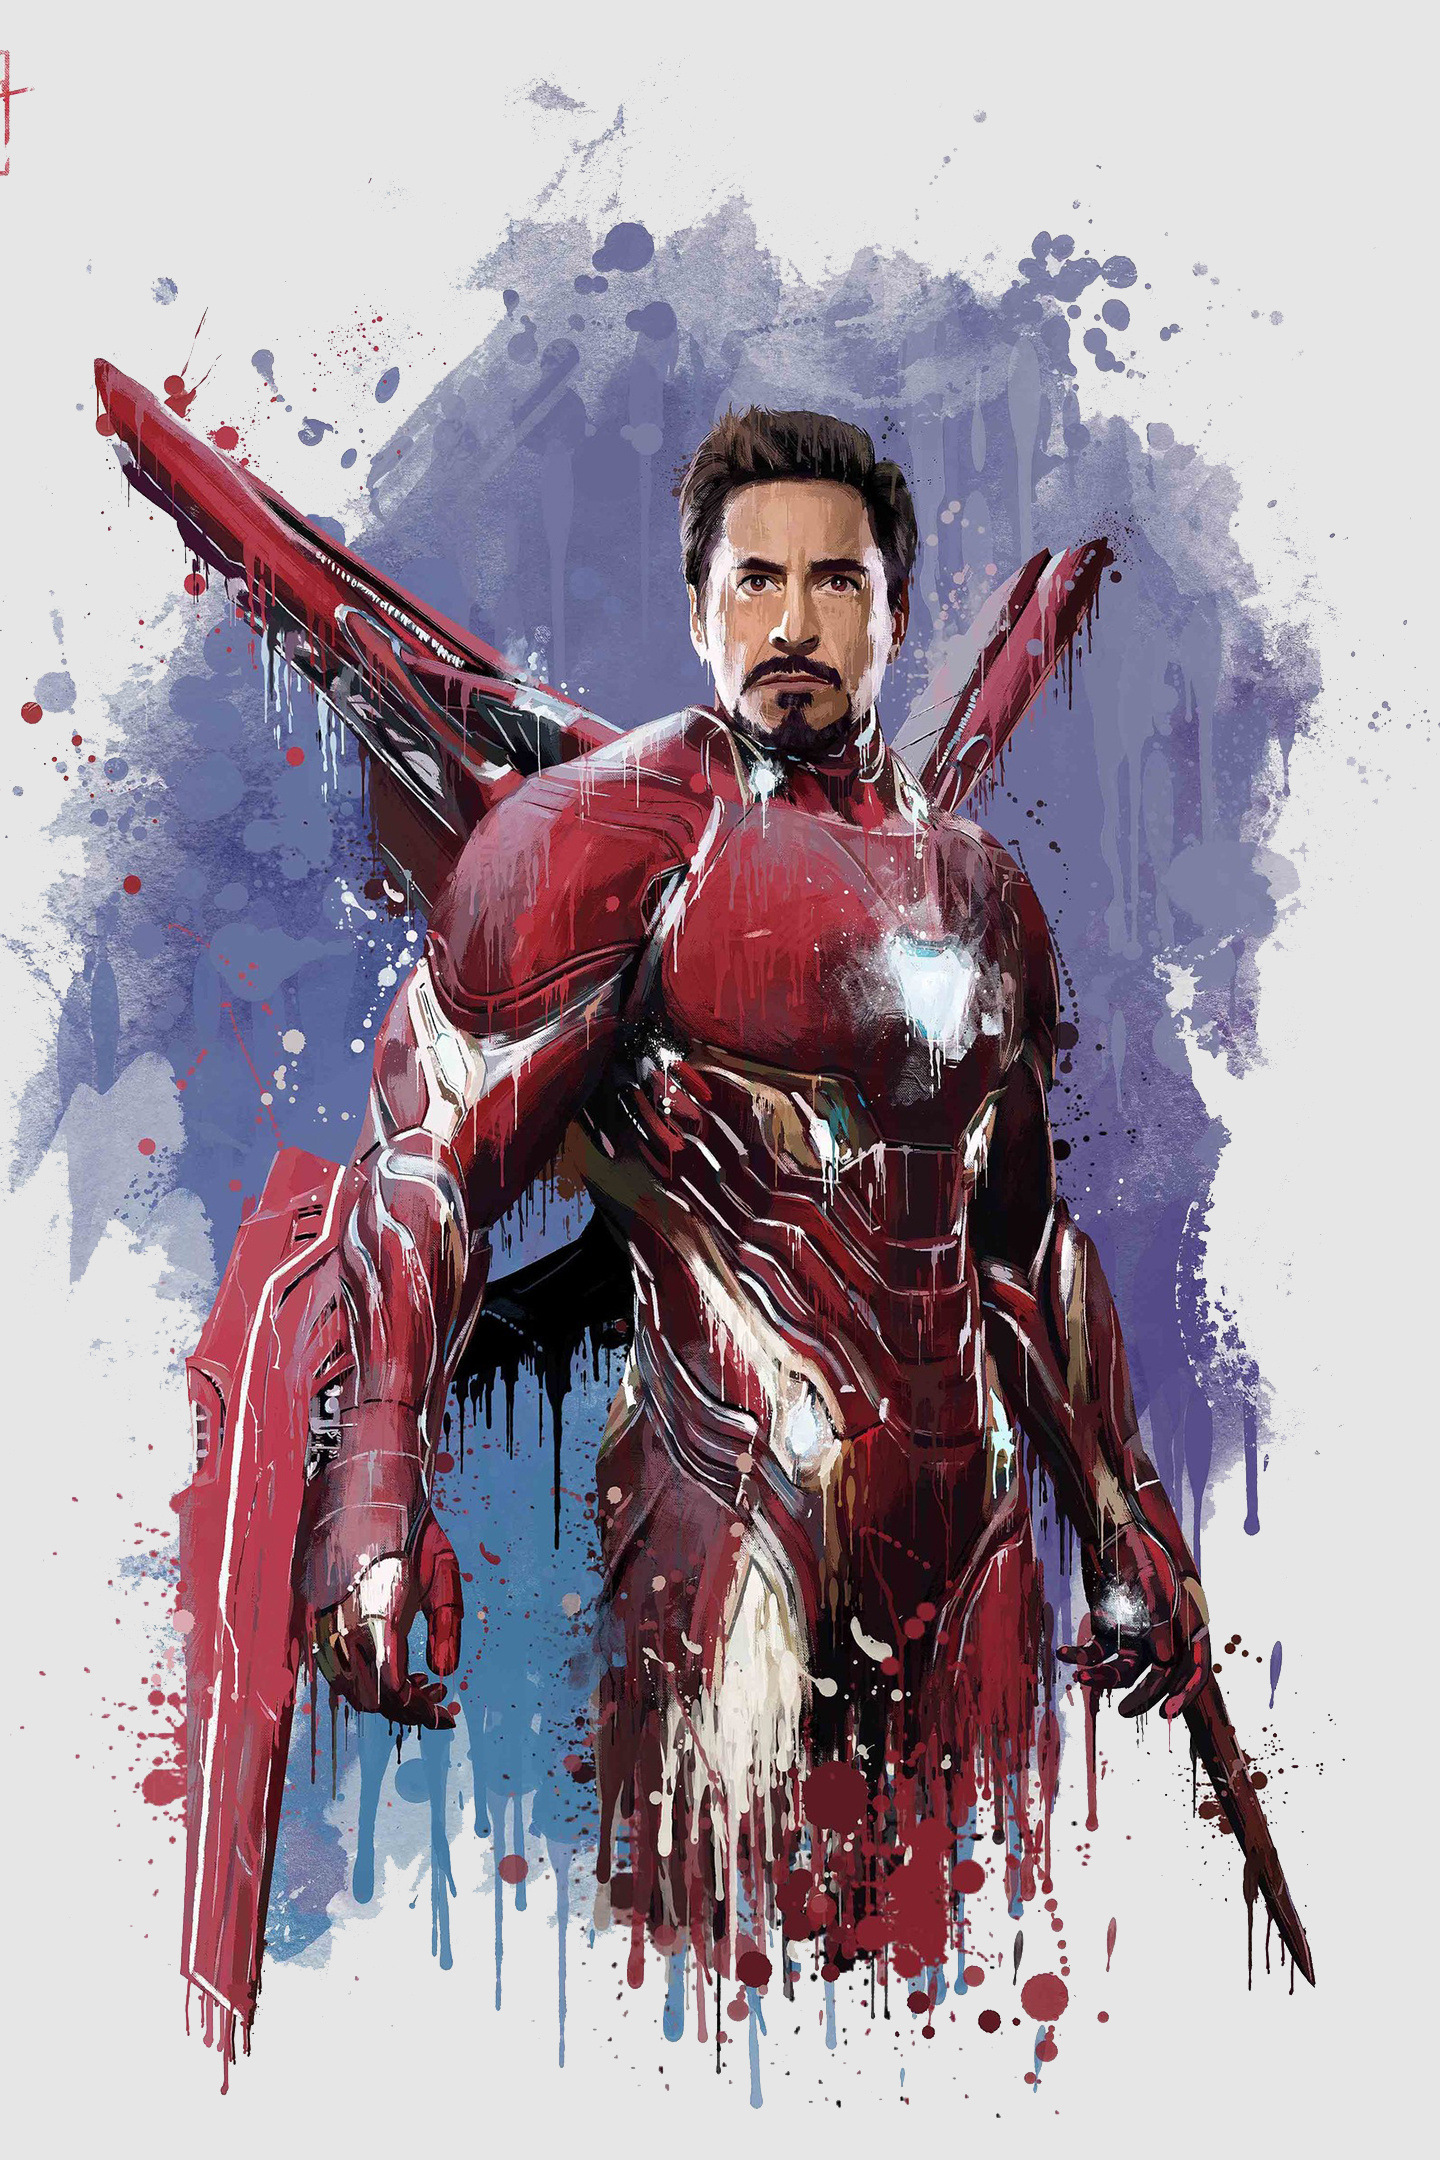 Infinity Iron Man Wallpapers Wallpaper Cave